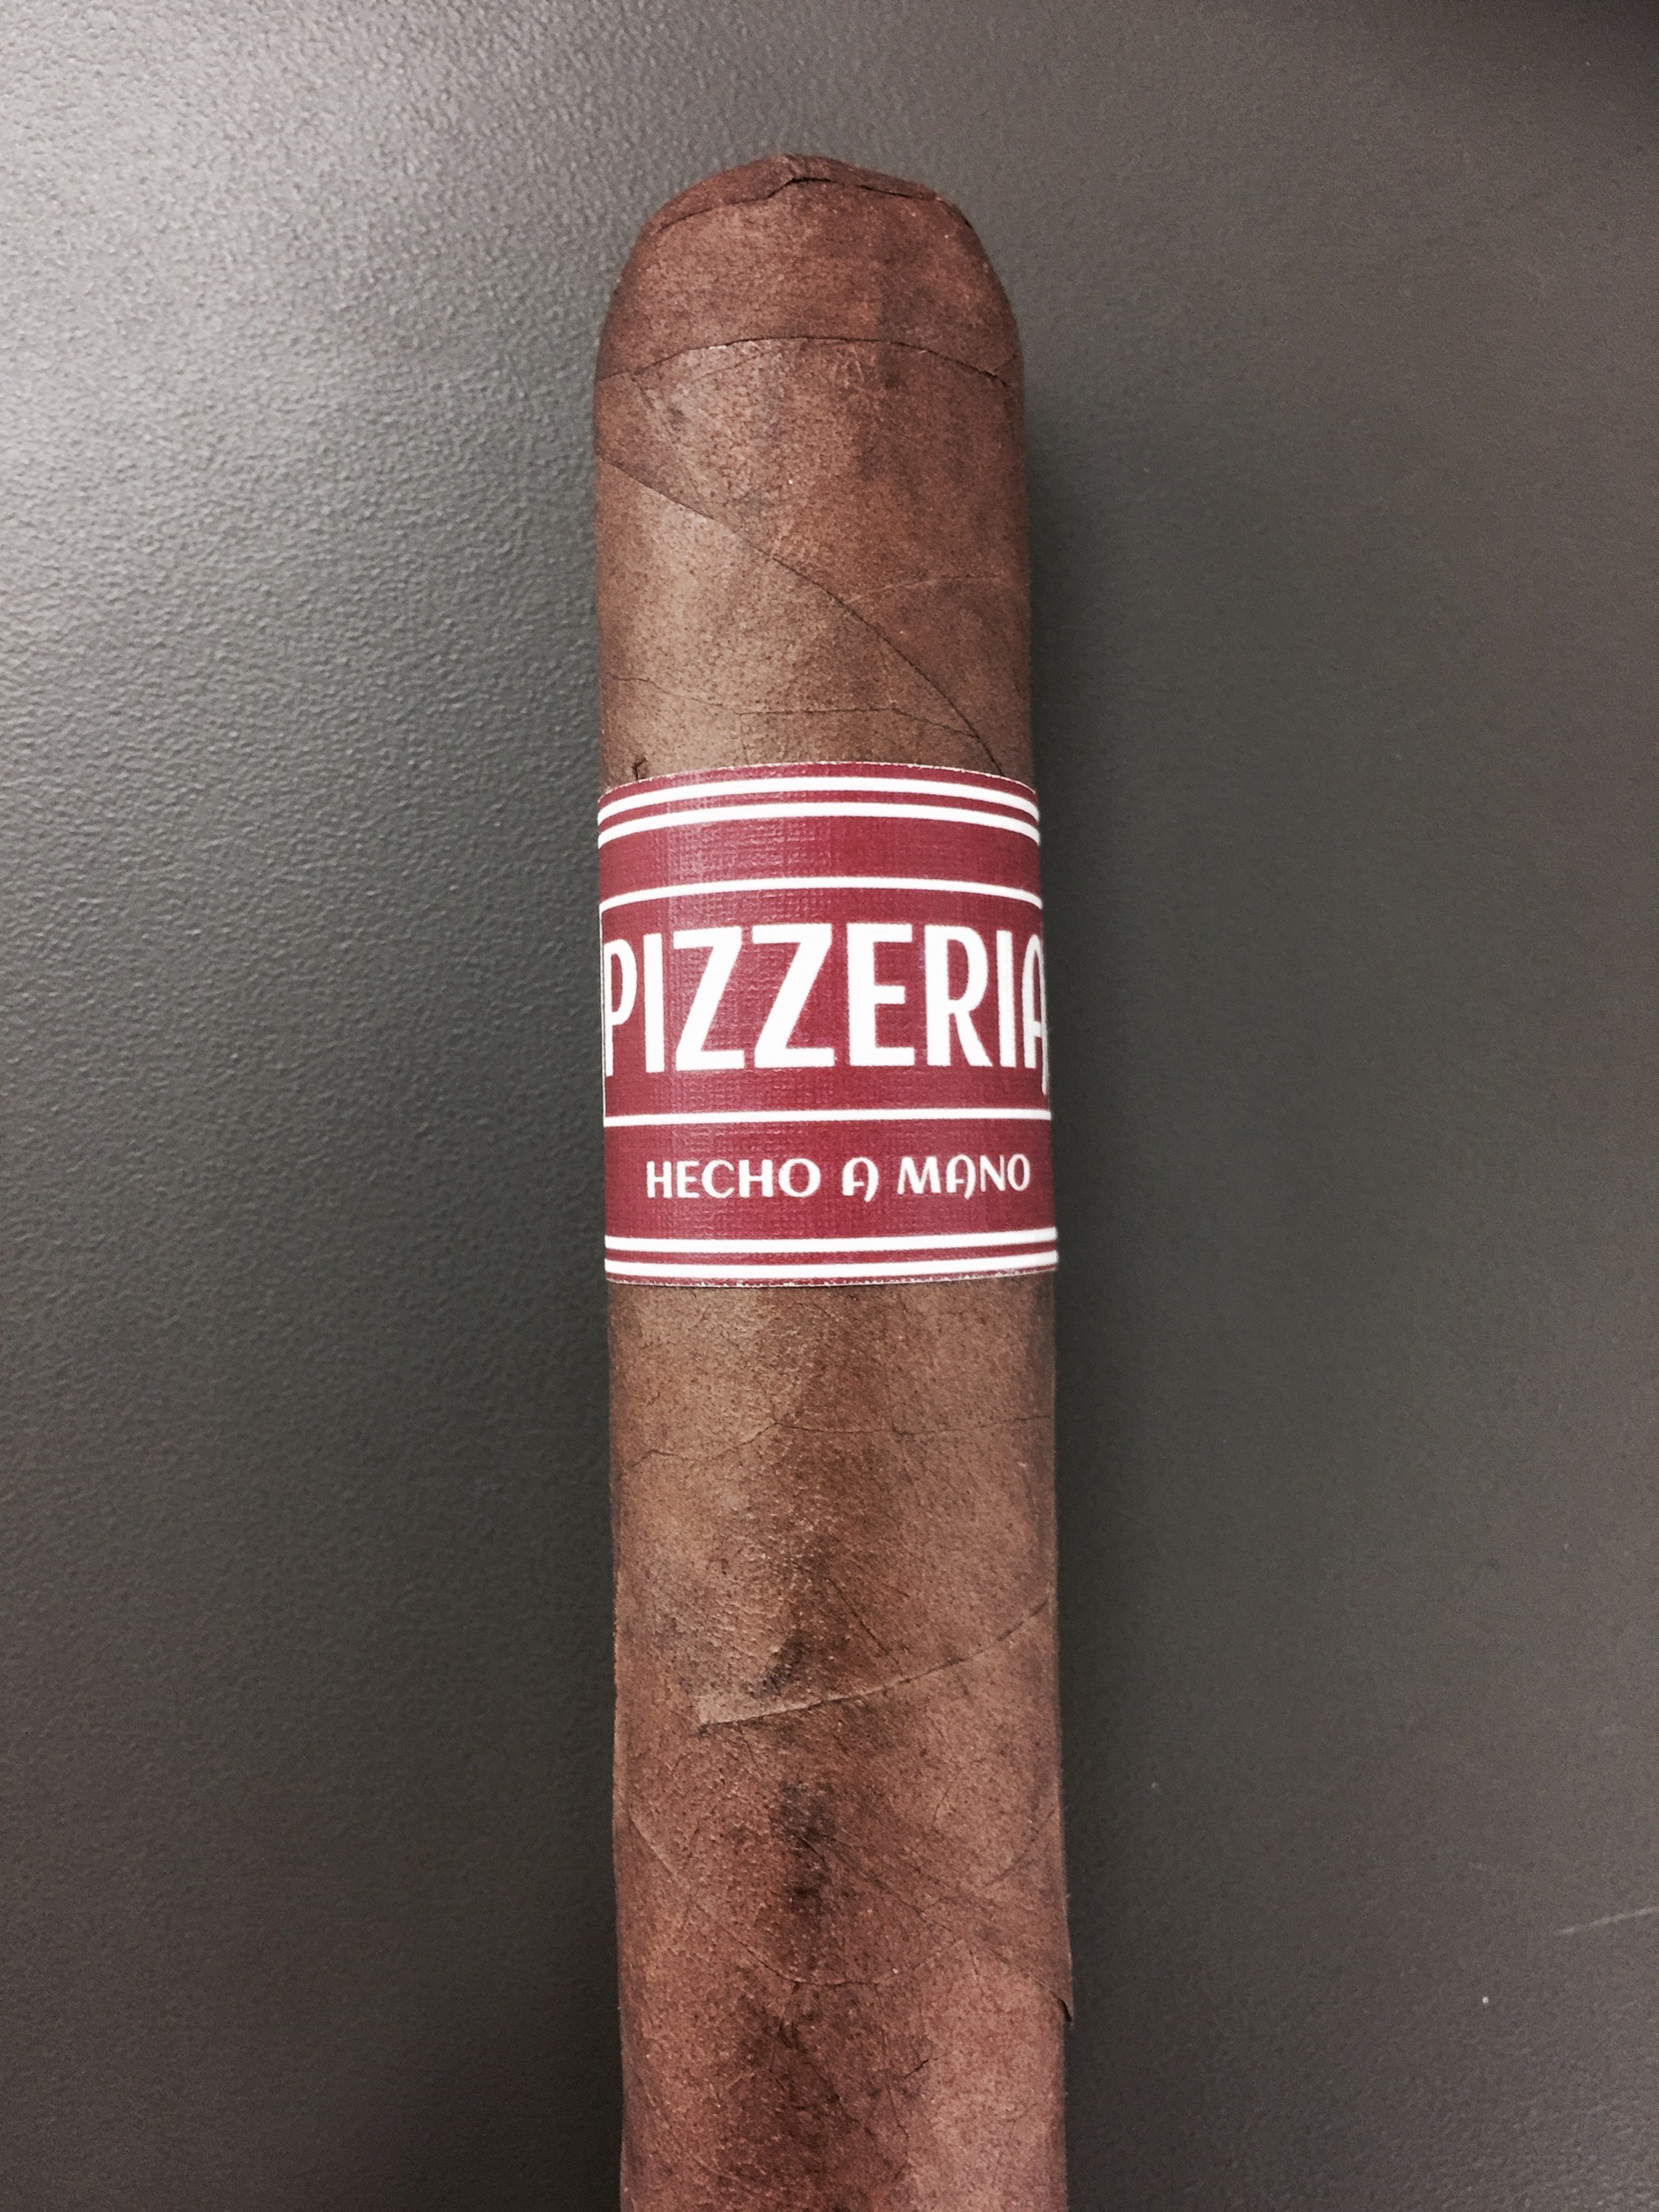 Dignity Cigars Pizzeria-2